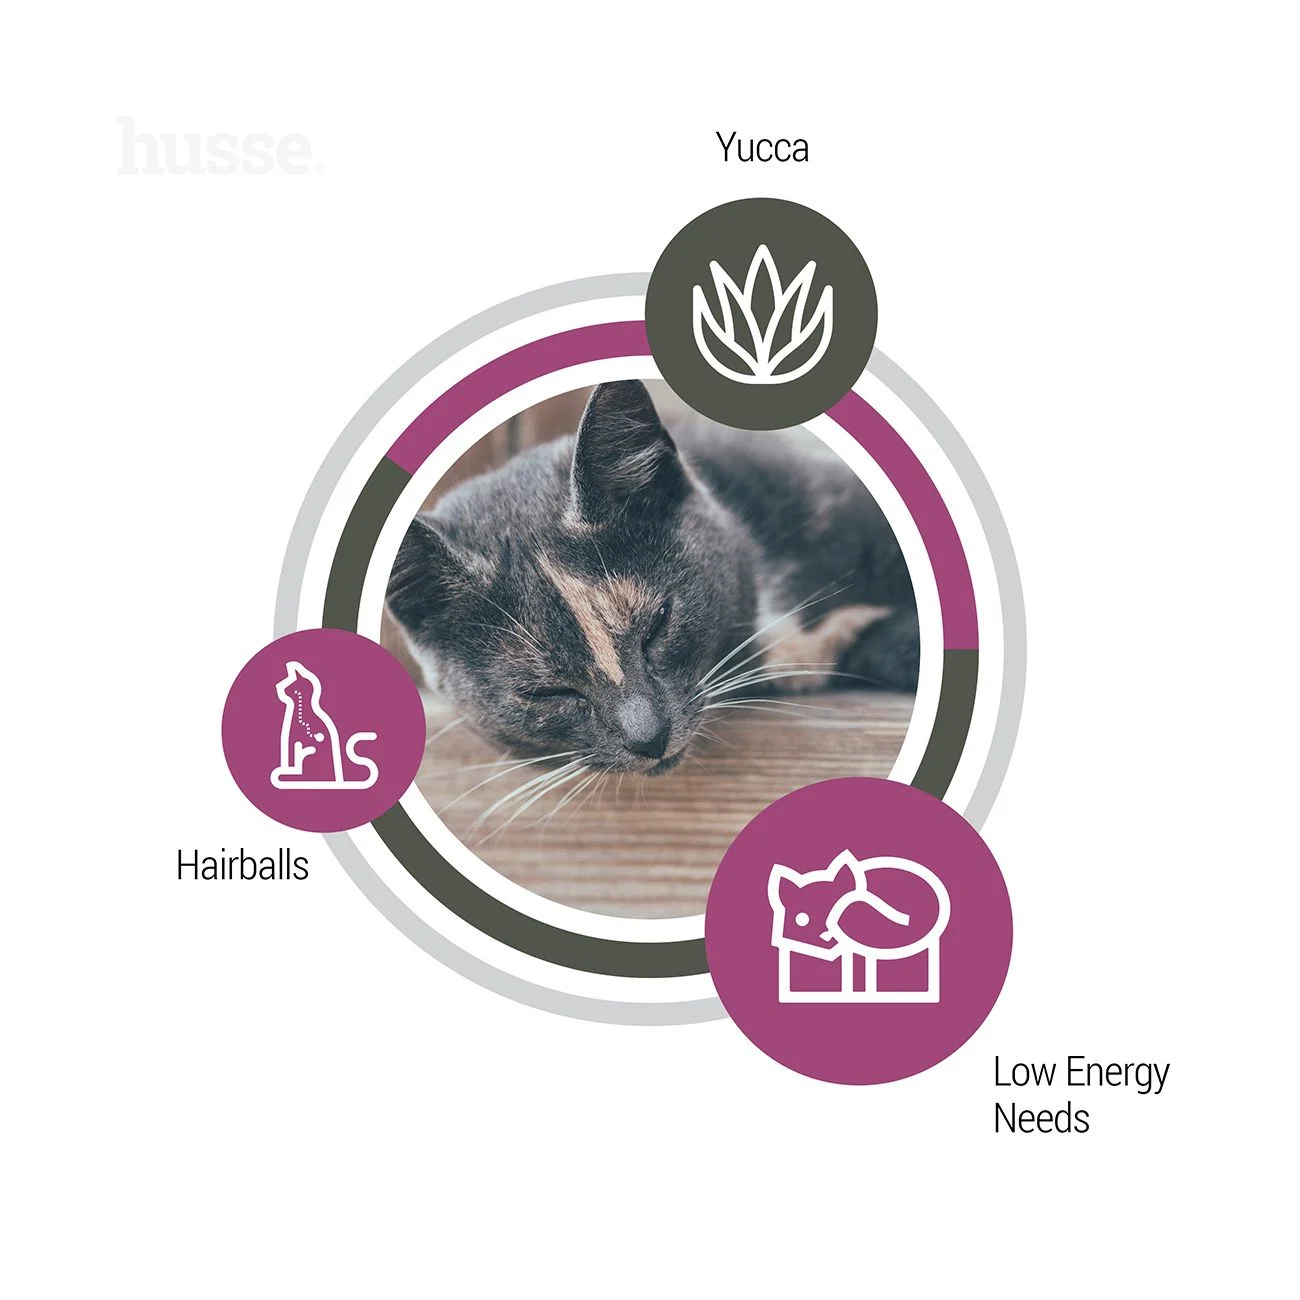 Exclusive Sterilised | Dry food made to satisfy a sterilised cat unique nutritional needs